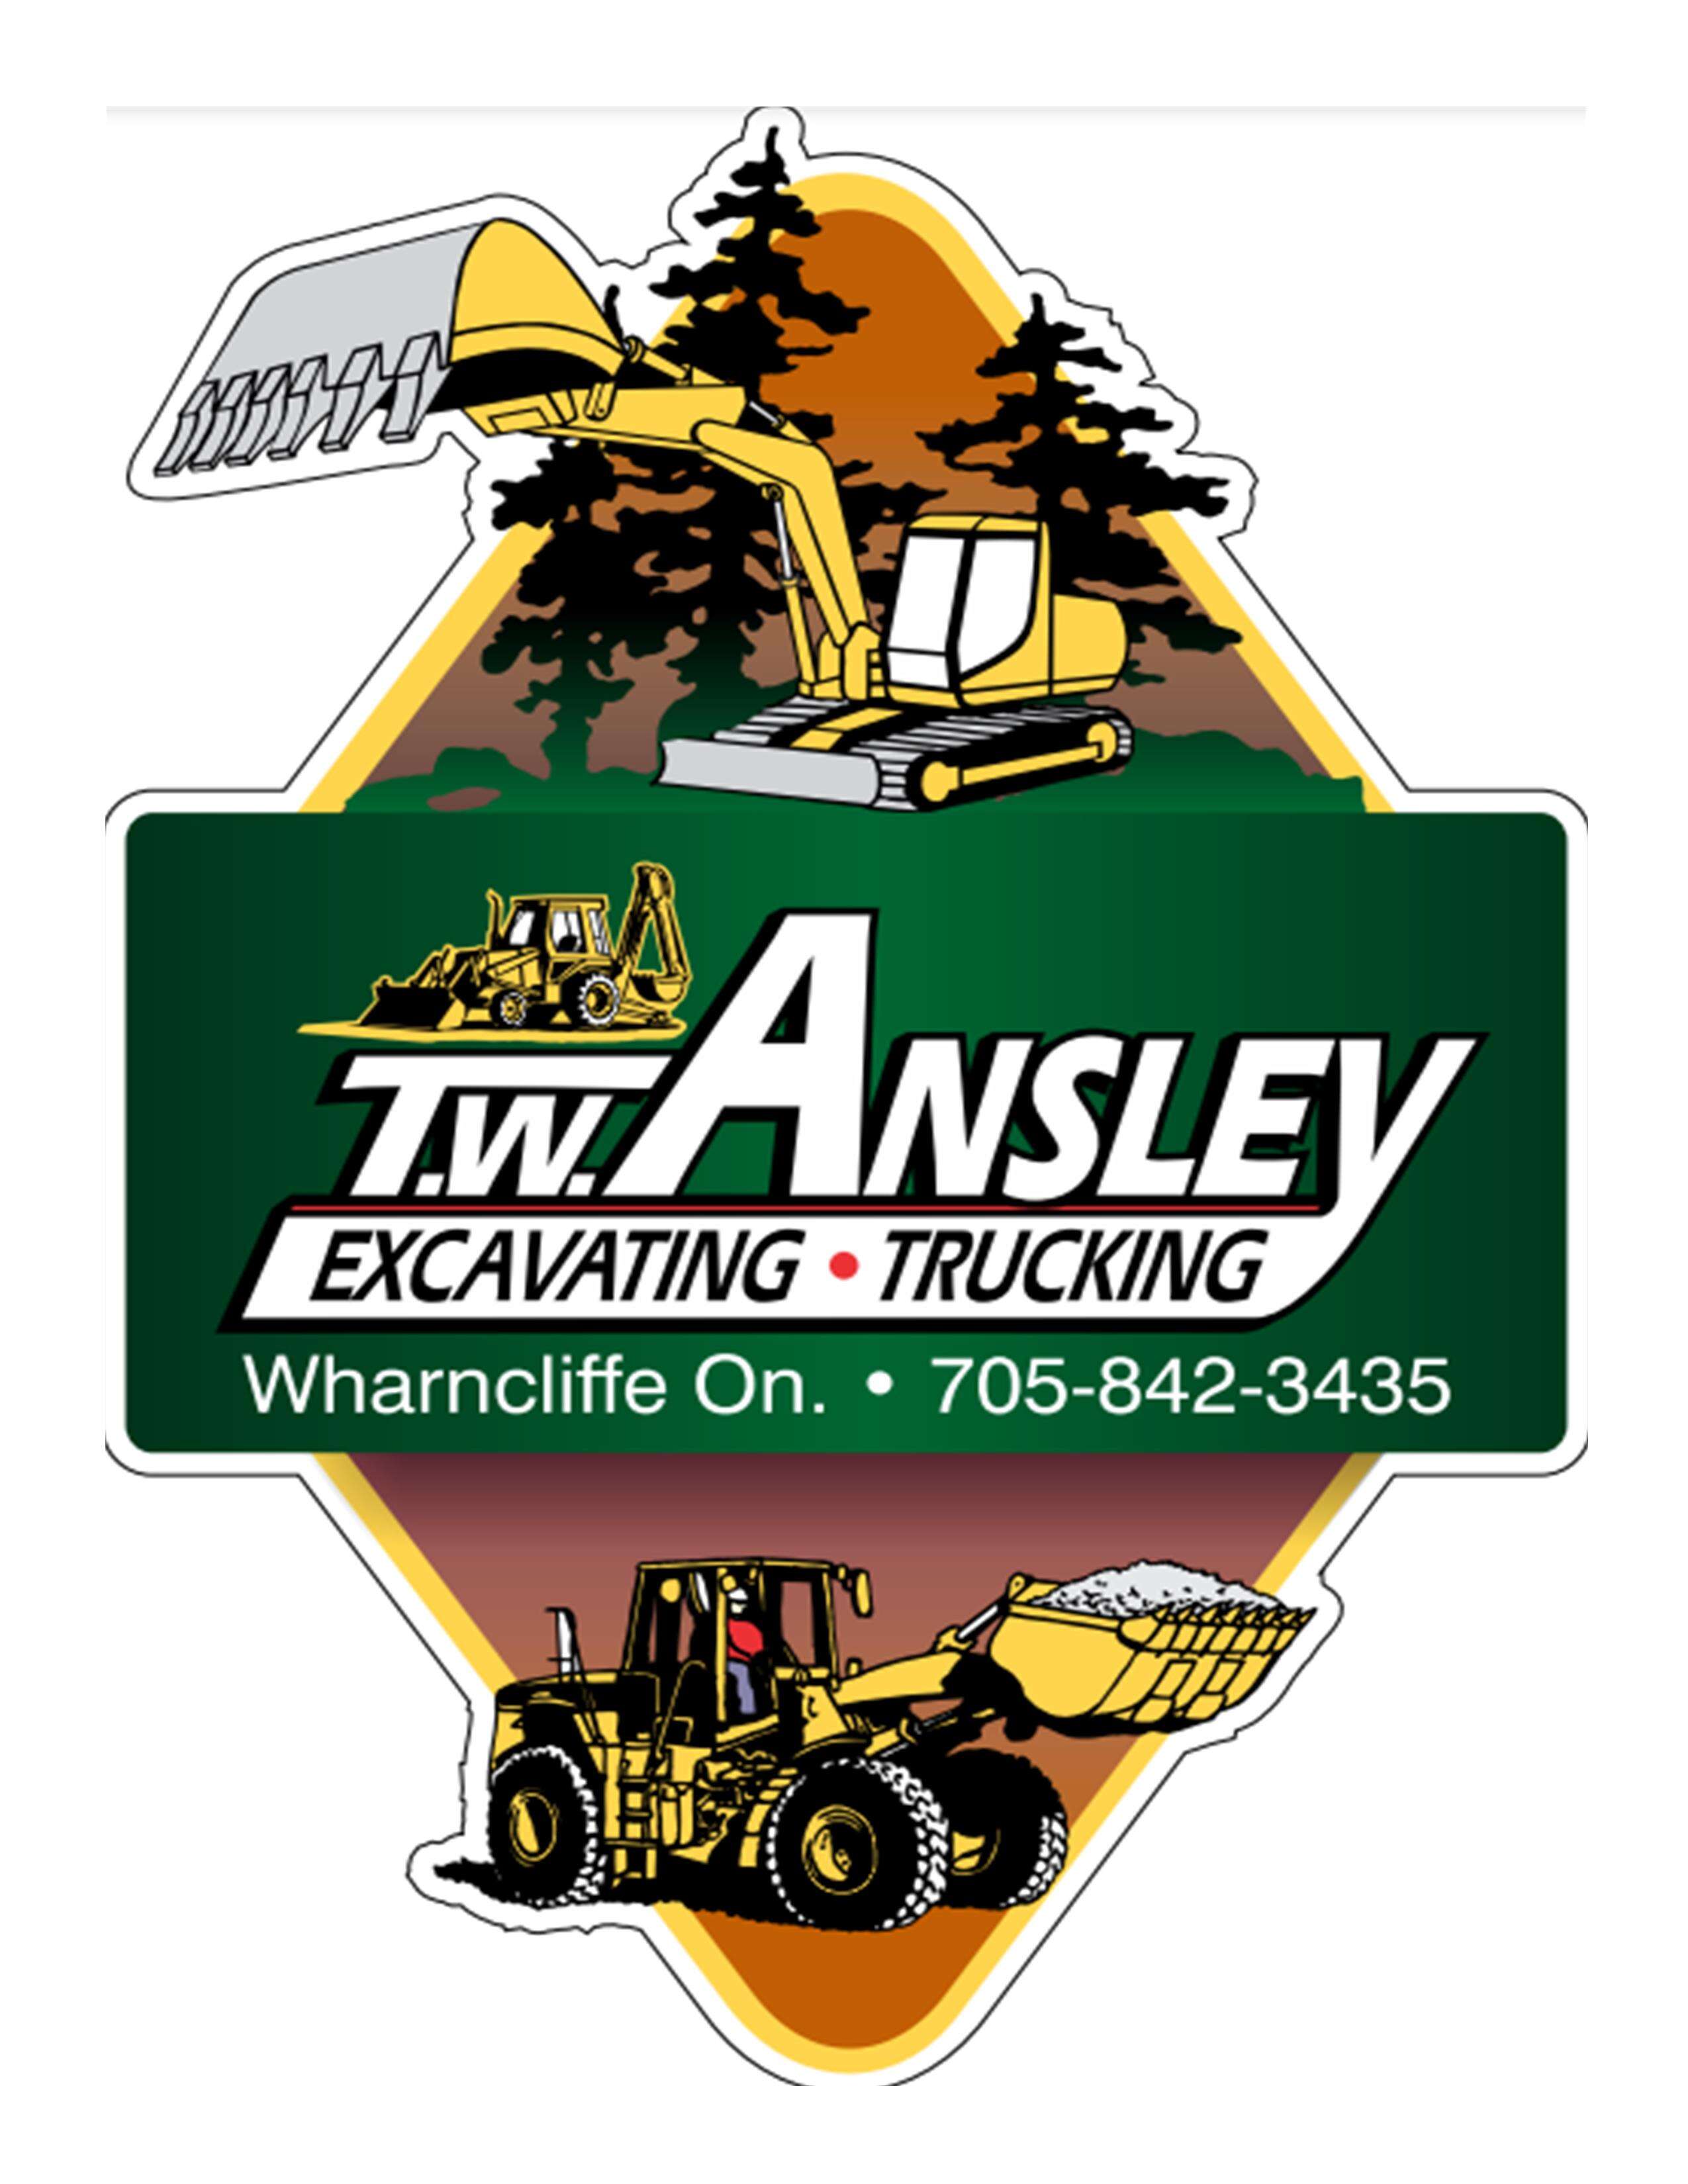 T.W. Ansley Excavating and Trucking